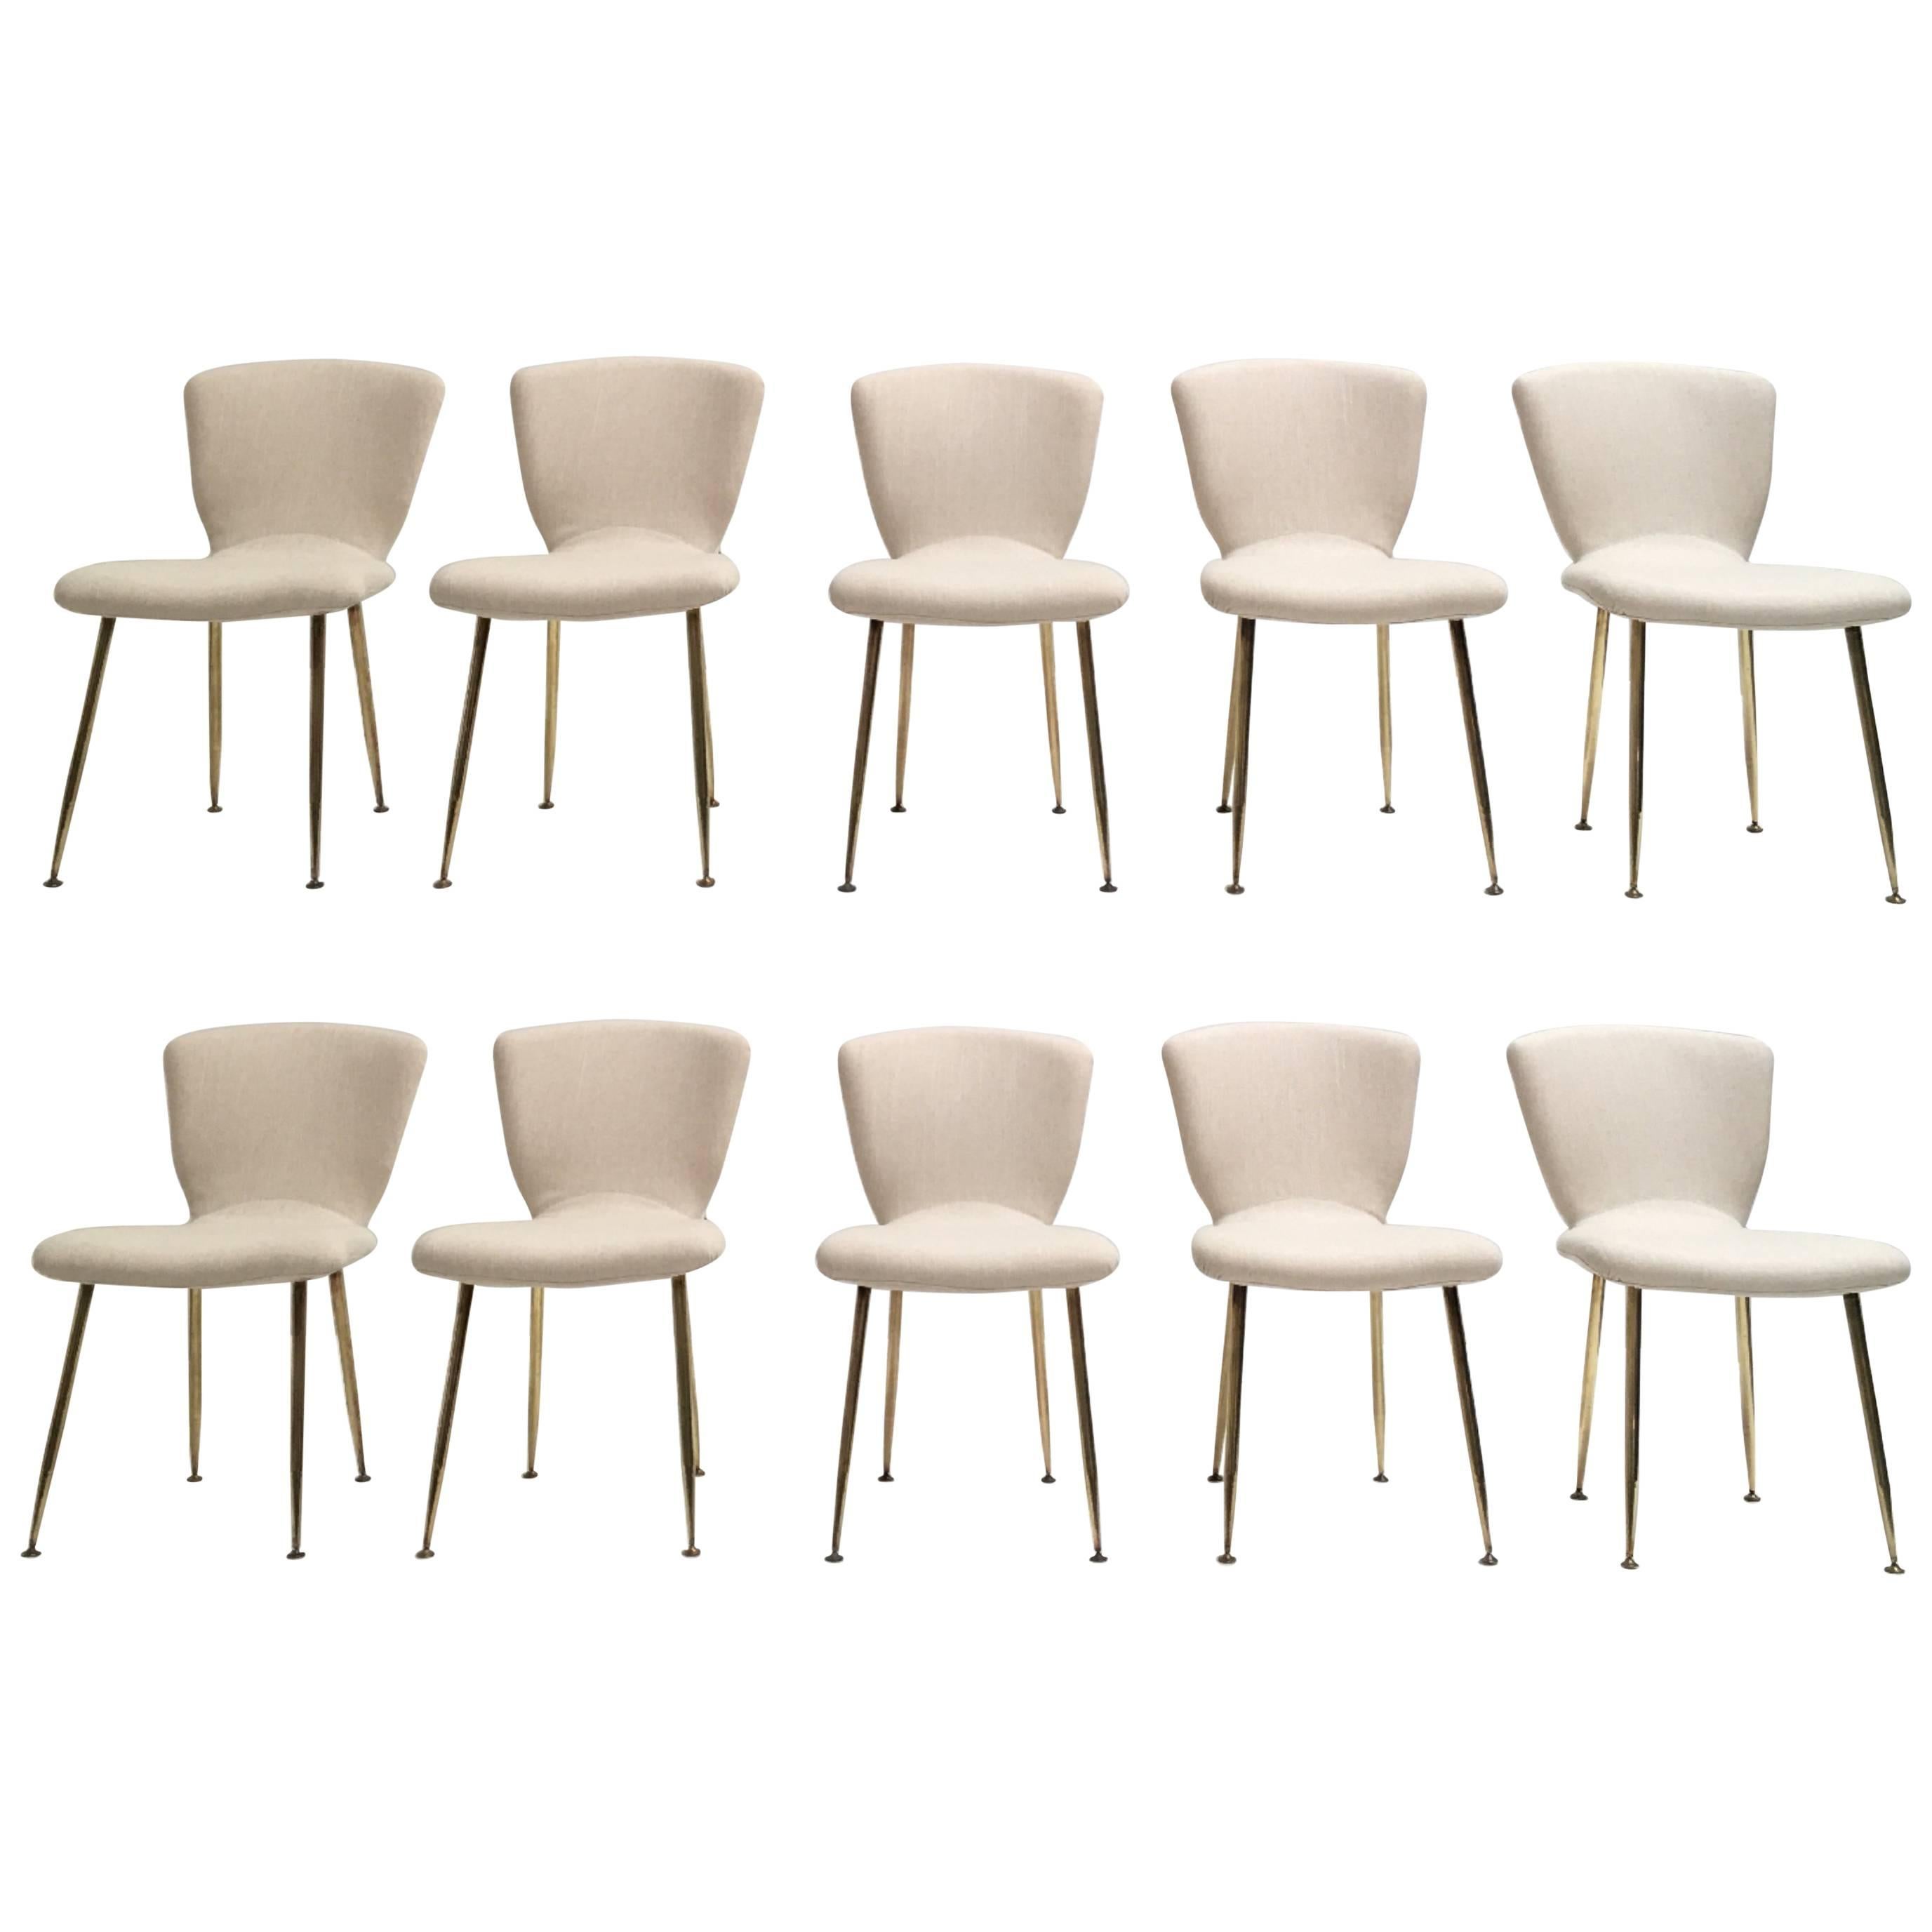 10 Dining Chairs by Louis Sognot for Arflex, 1959, brass legs, Upholstery Restored